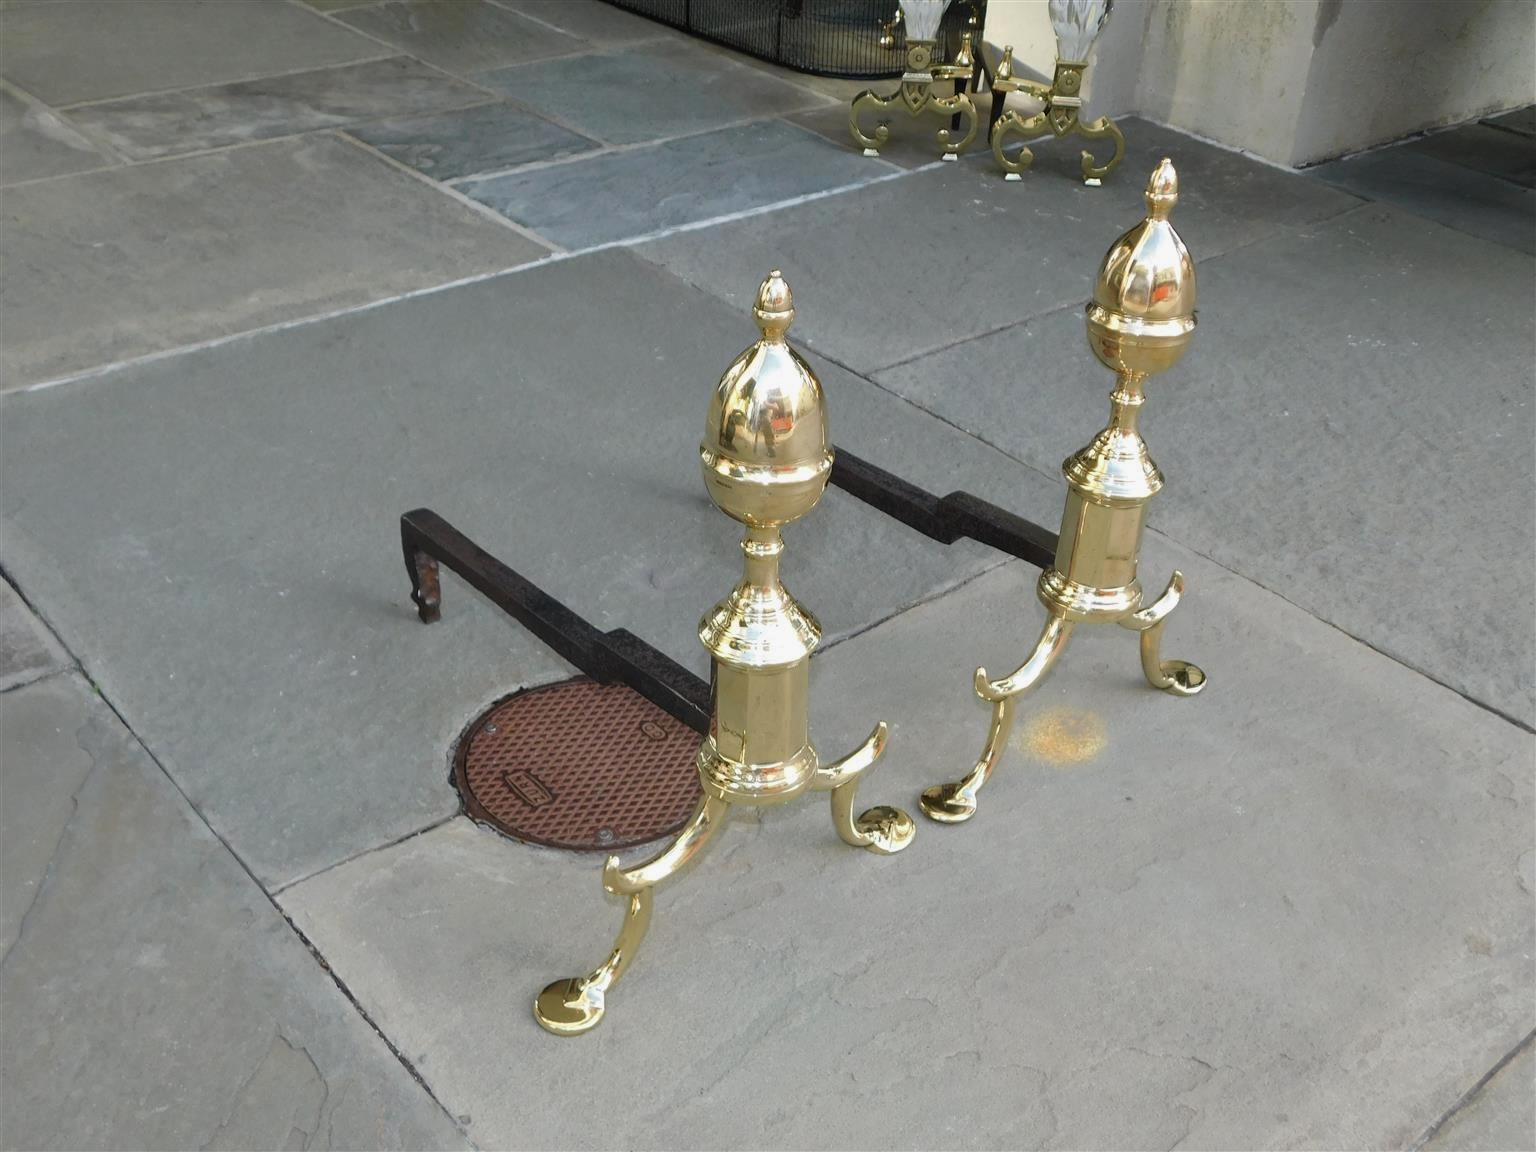 Pair of American brass flanking acorn faceted finial andirons with turned faceted plinths, scrolled spur legs, and resting on penny feet, New York. Late 18th century.